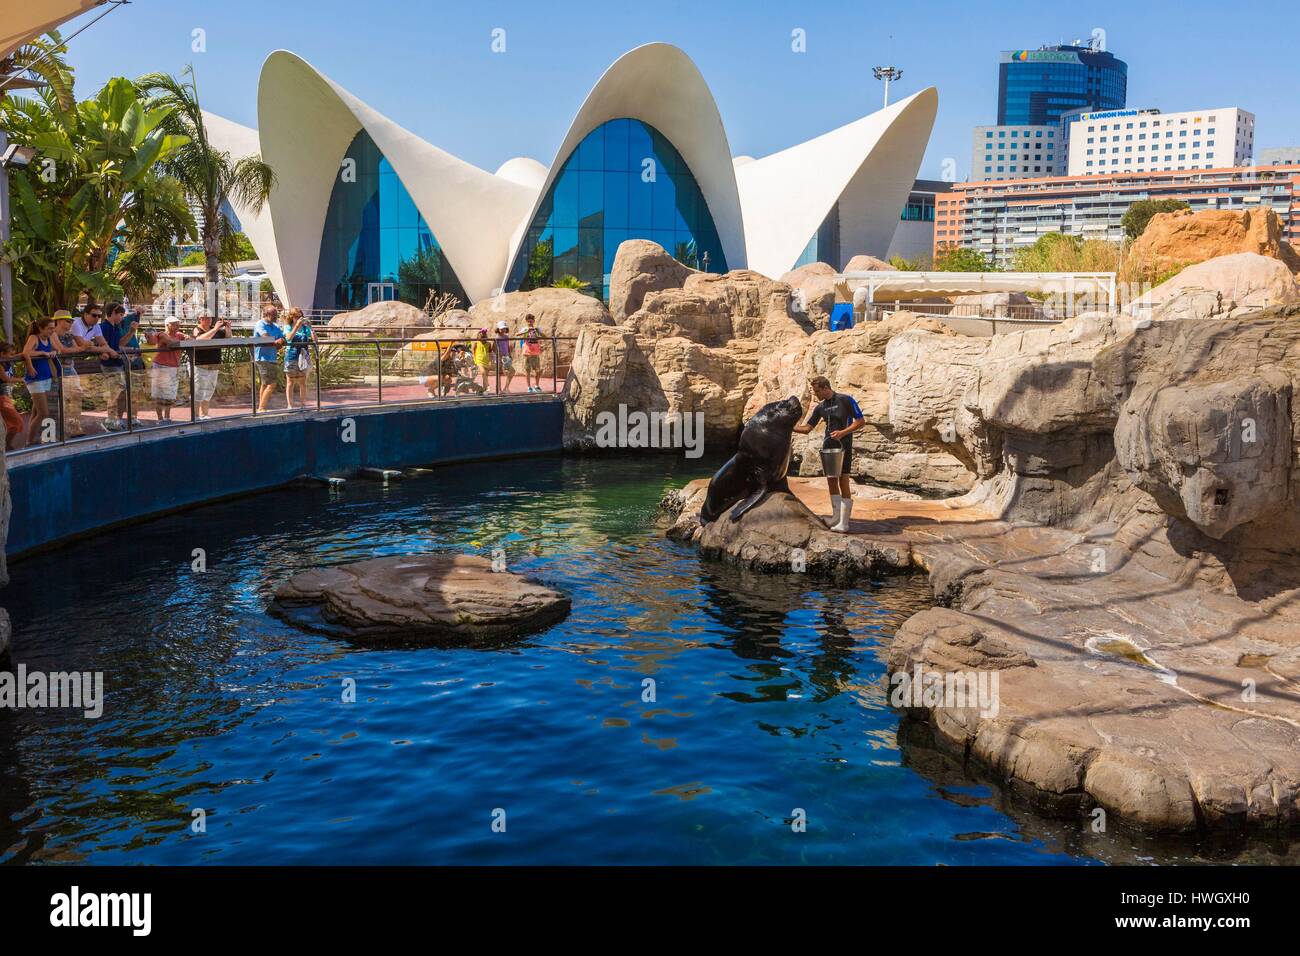 Spain, Valencia, City of Sciences and Arts, Oceanografic, the largest oceanographic park in Europe, sea lion show Stock Photo